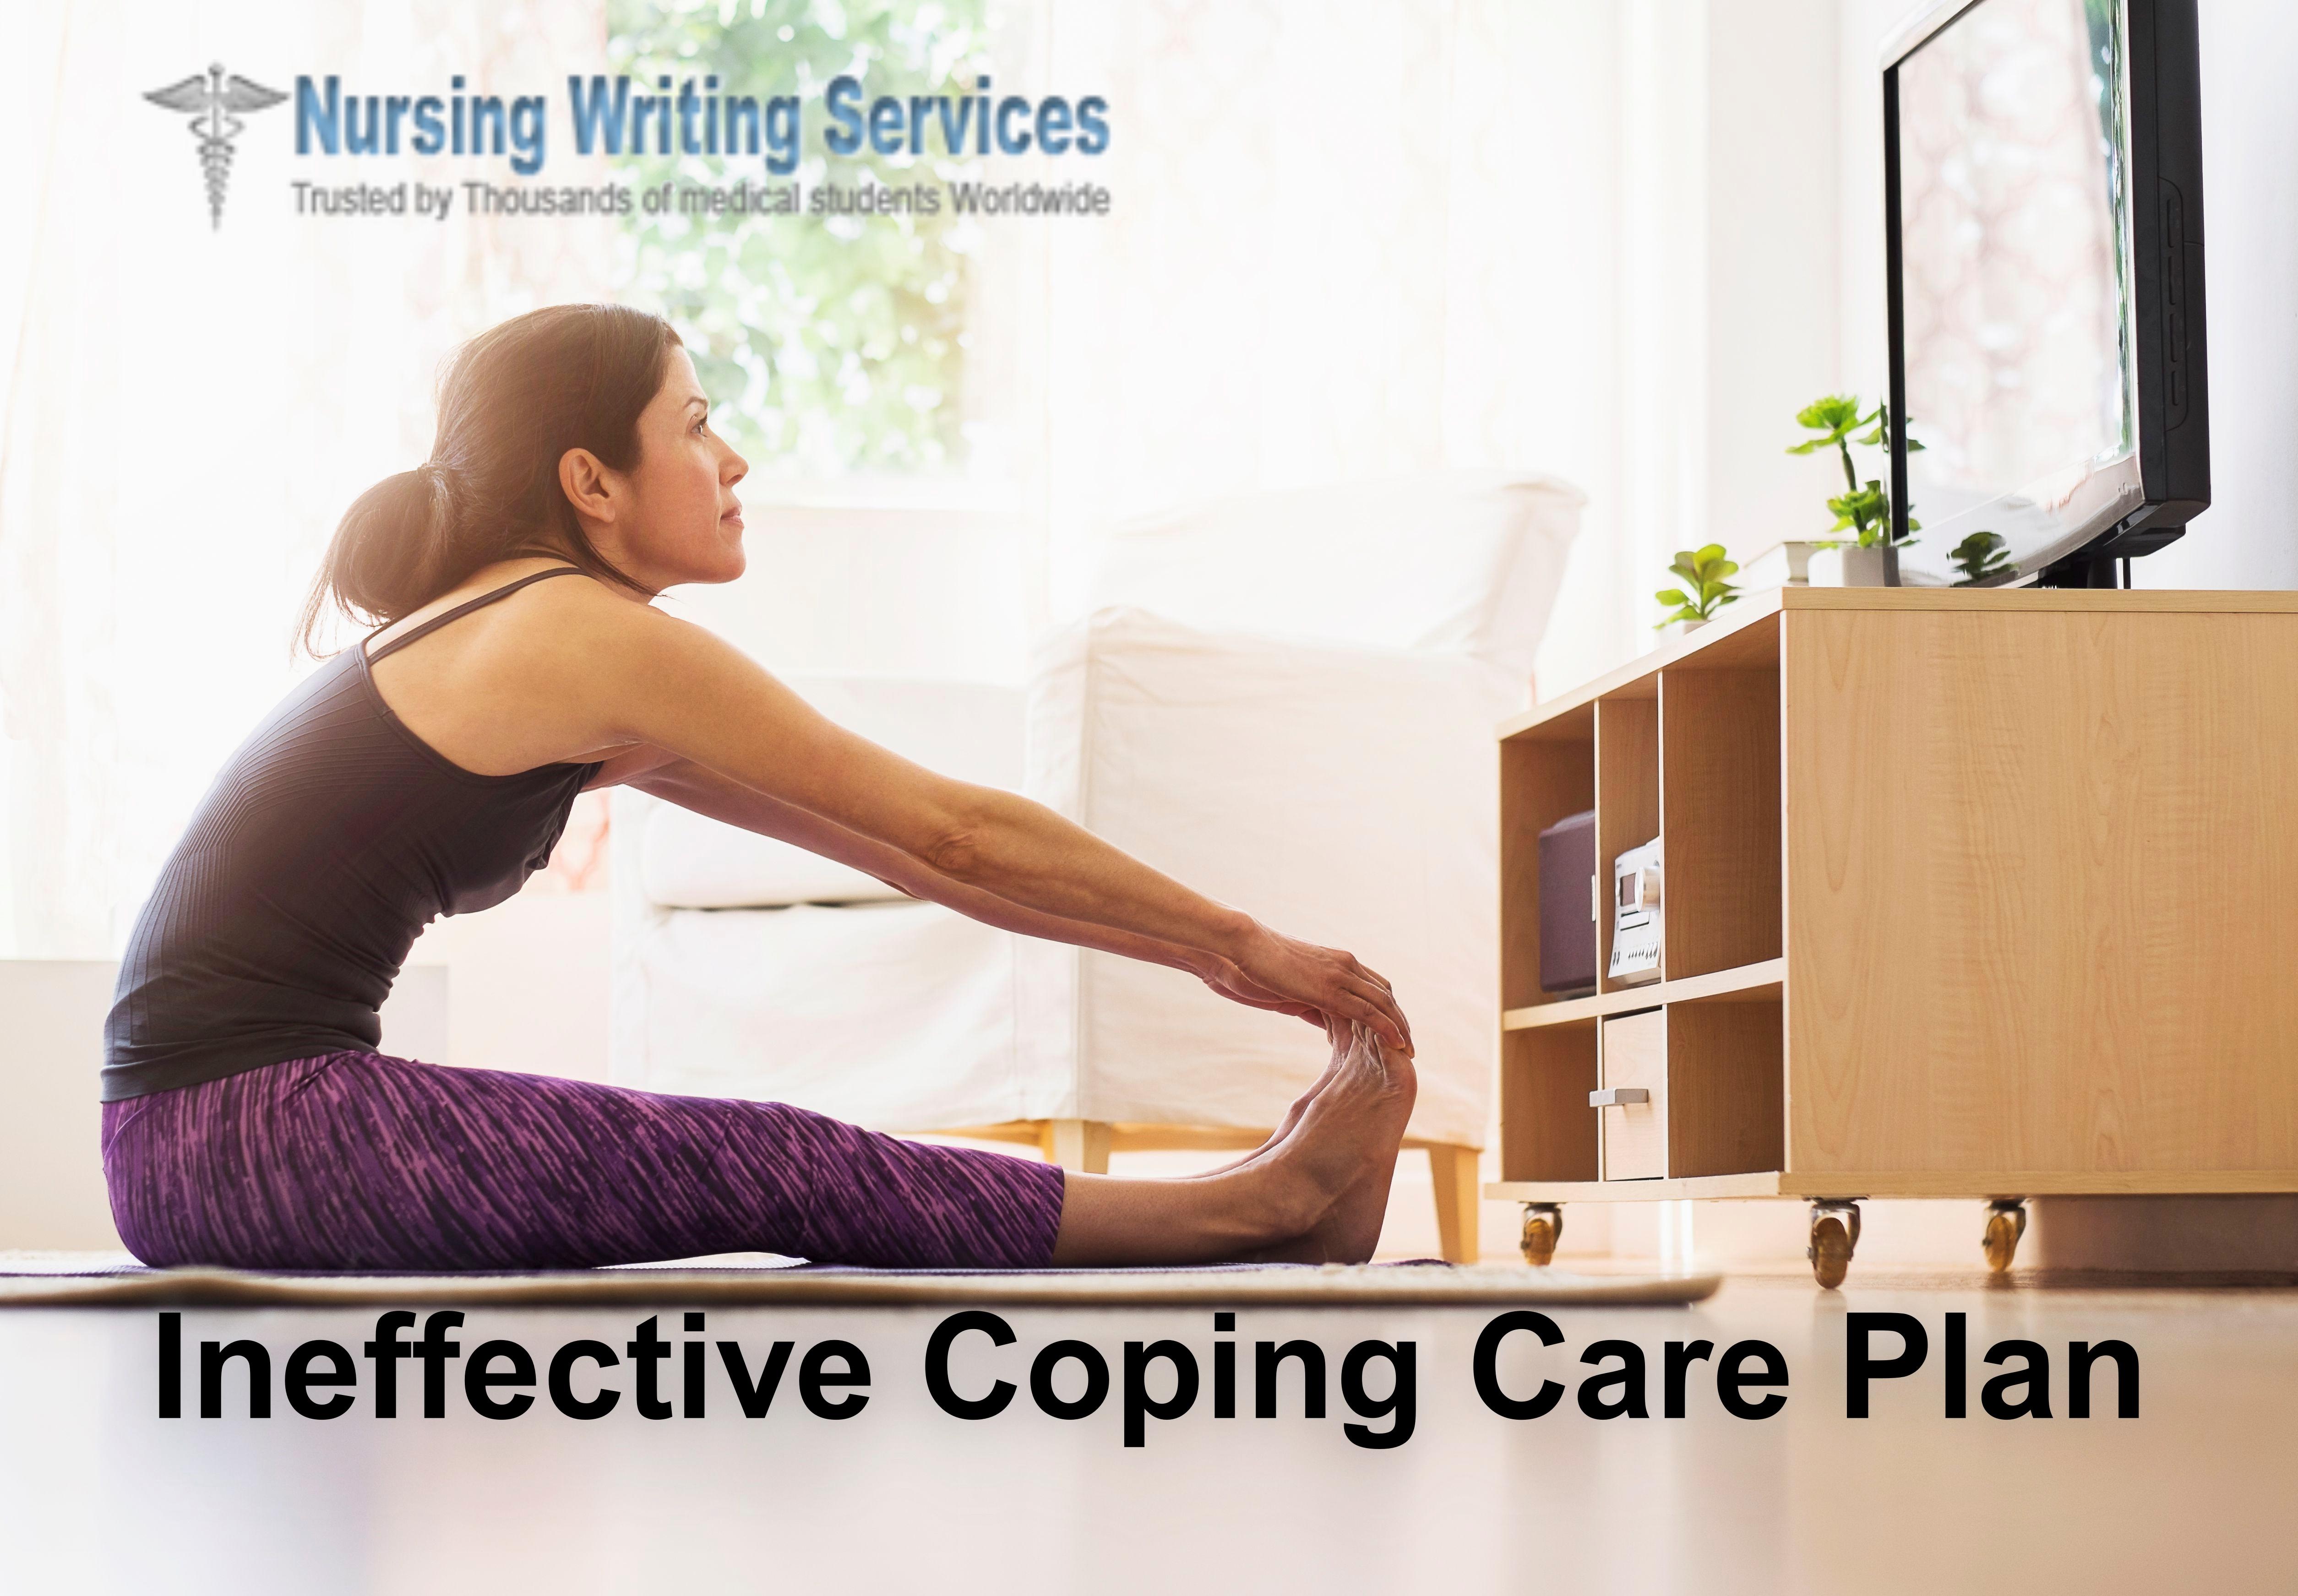 Ineffective Coping Care Plan Writing Services